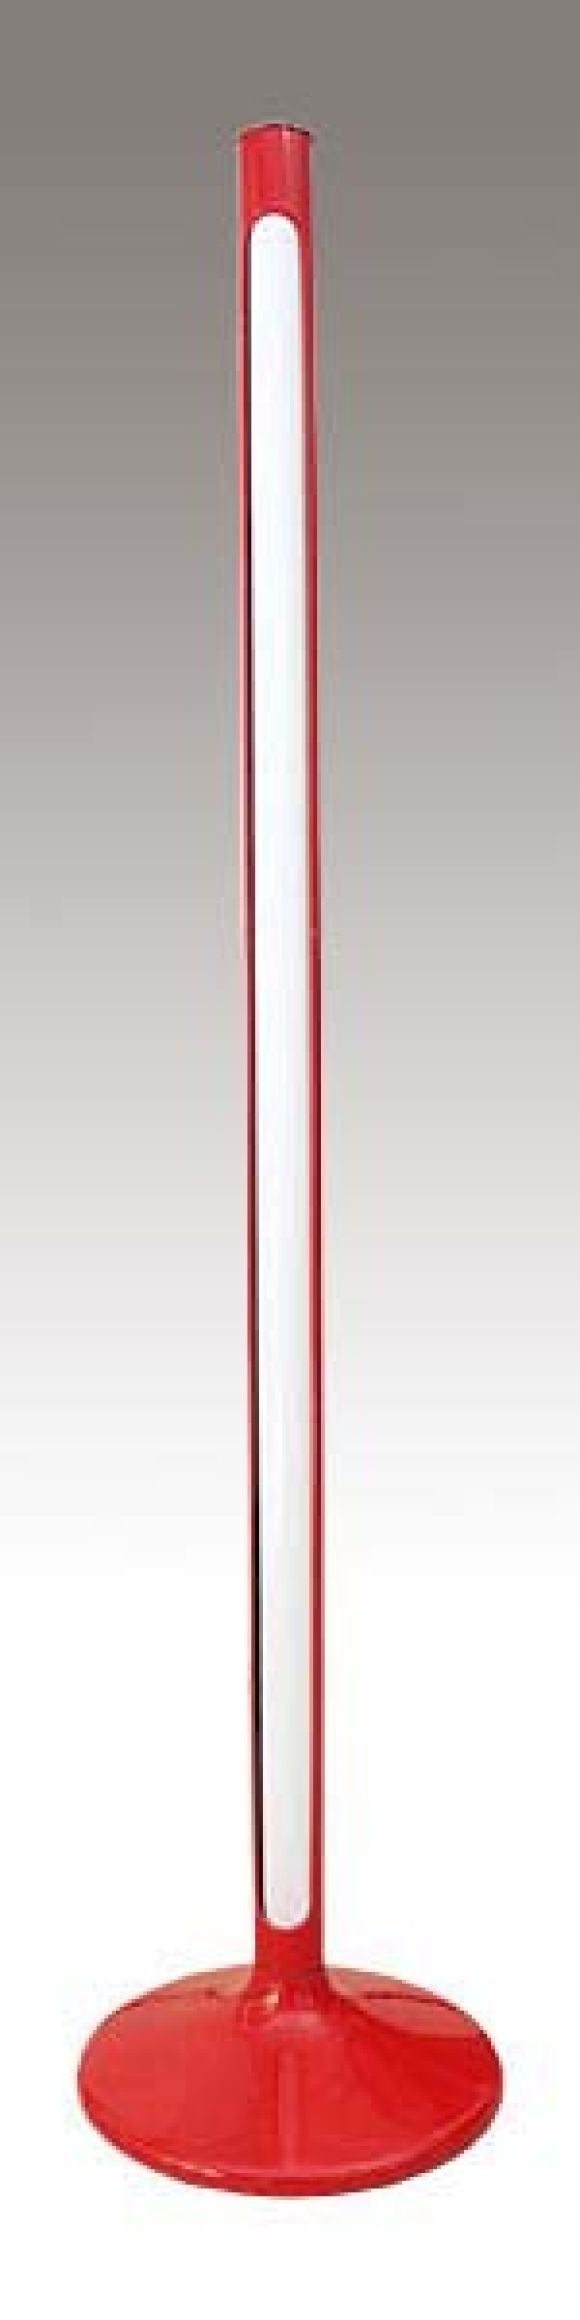 Bright red enameled metal shell holding one long fourescent tube. Lamp designed for George Pompidou's home.<br />
DIMENSIONS: 12 in. diameter x 53 in. high